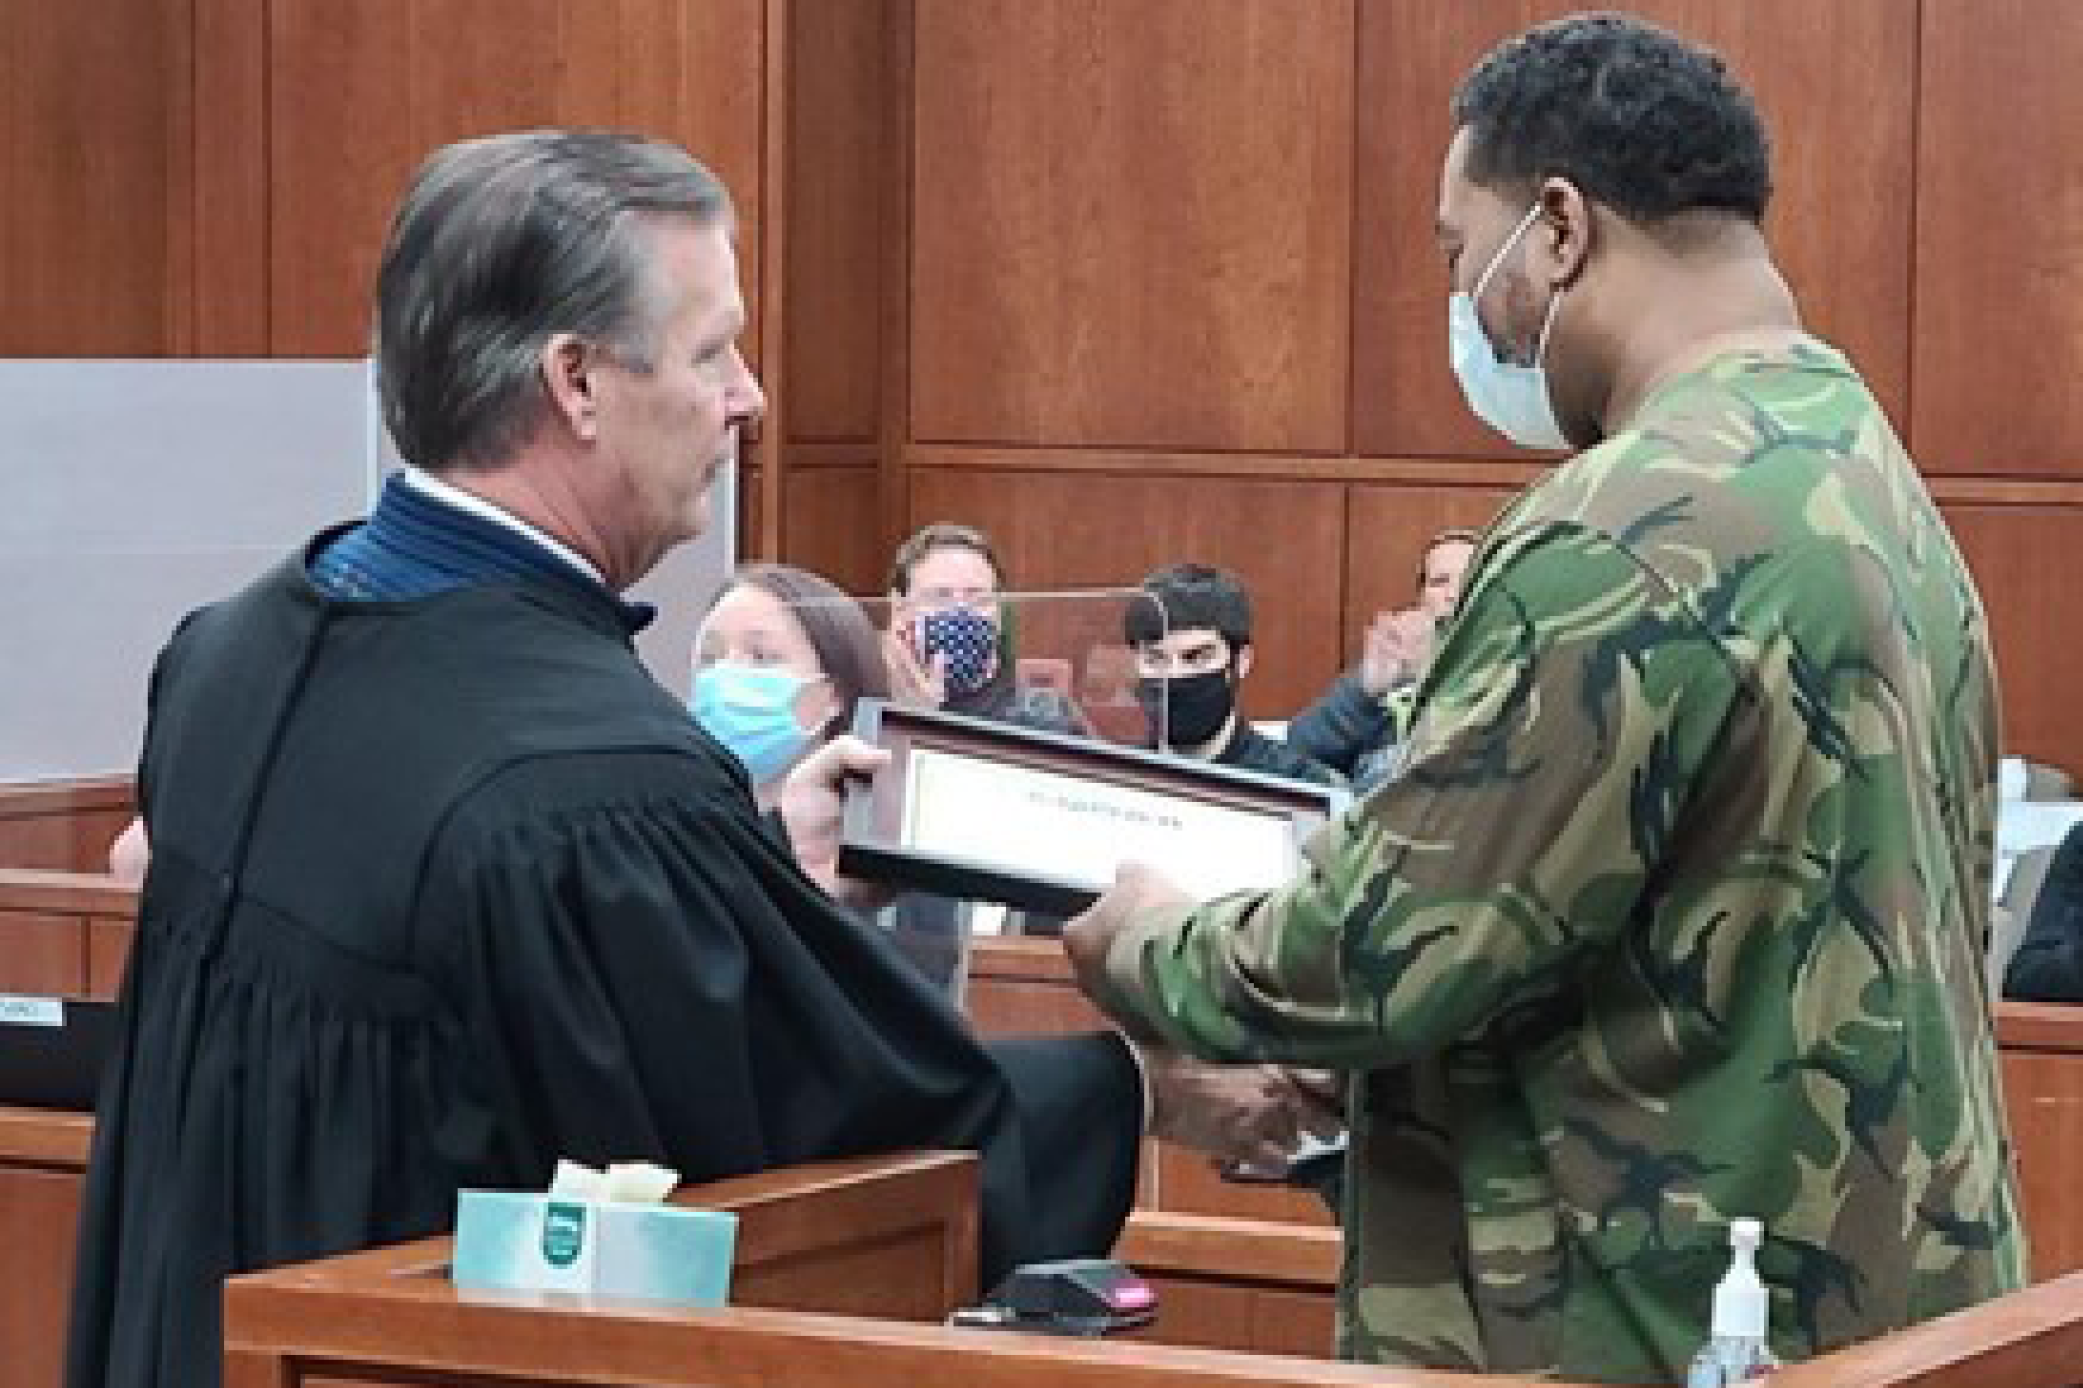 Image of a judge wearing his judicial robe handing a framed diploma to man wearing a camoflage shirt